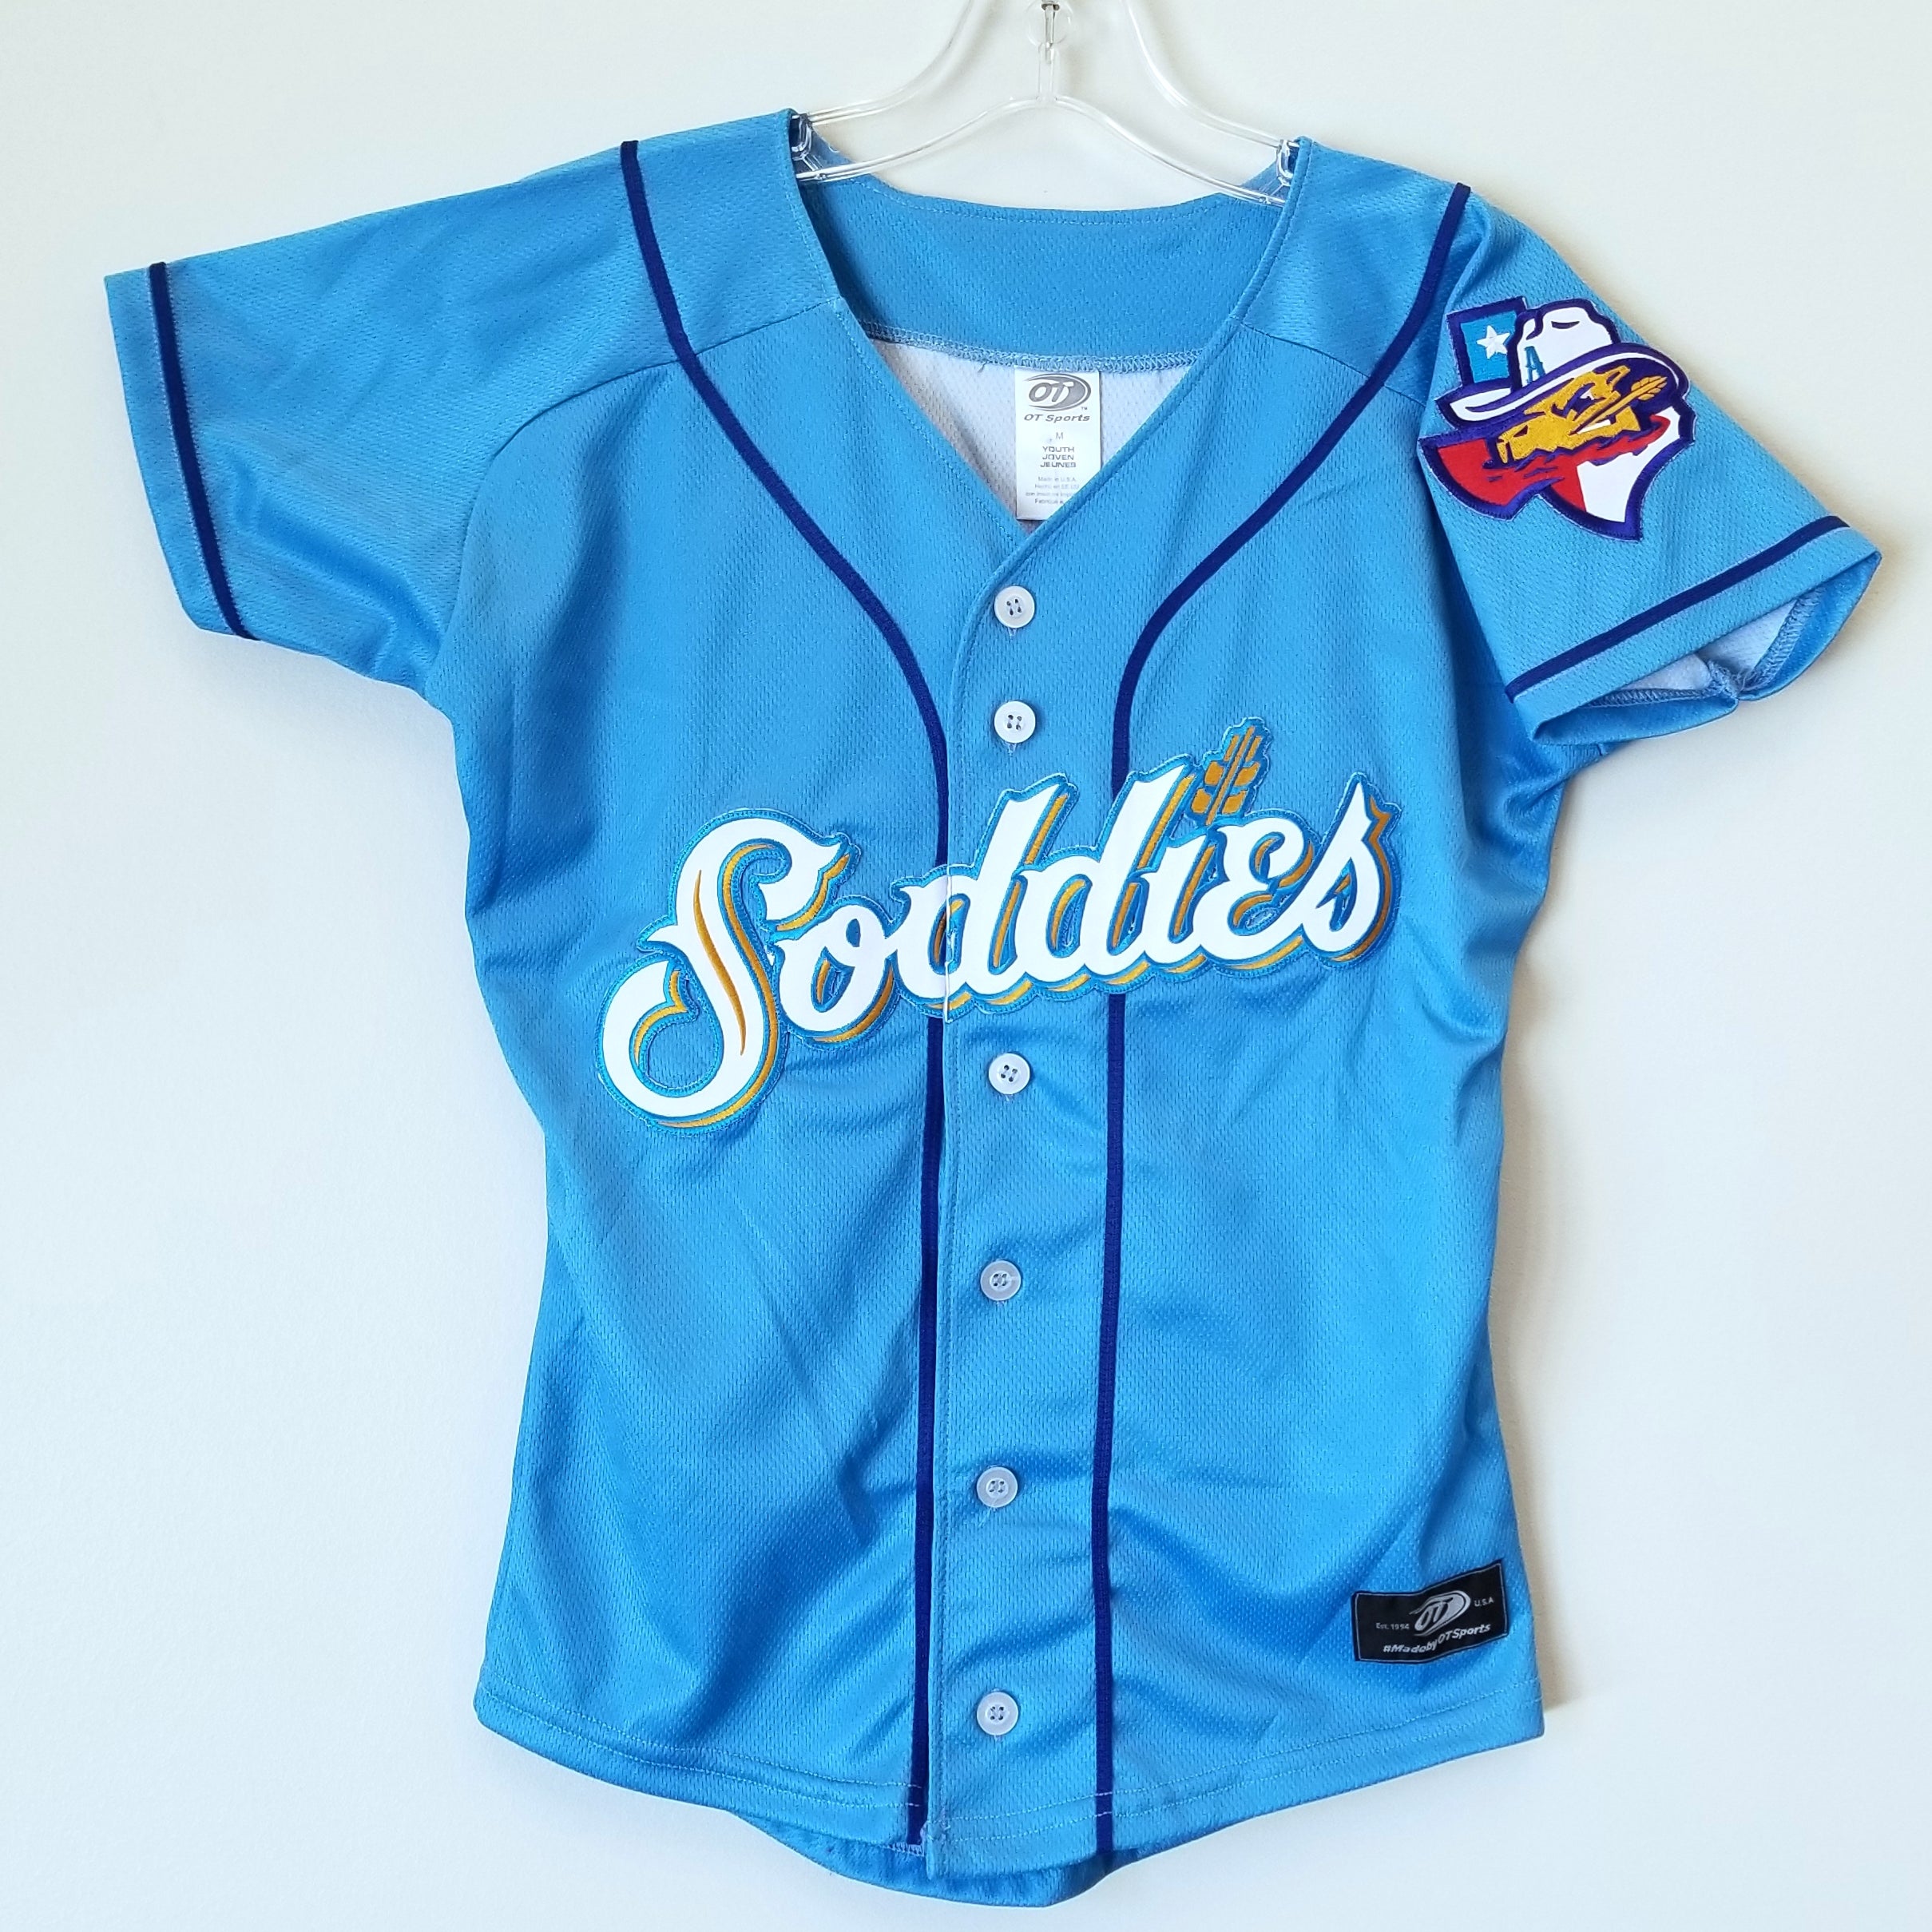 Stadium Series Jerseys - BASEBALL From $65 – Ashby's Crafts and Gifts